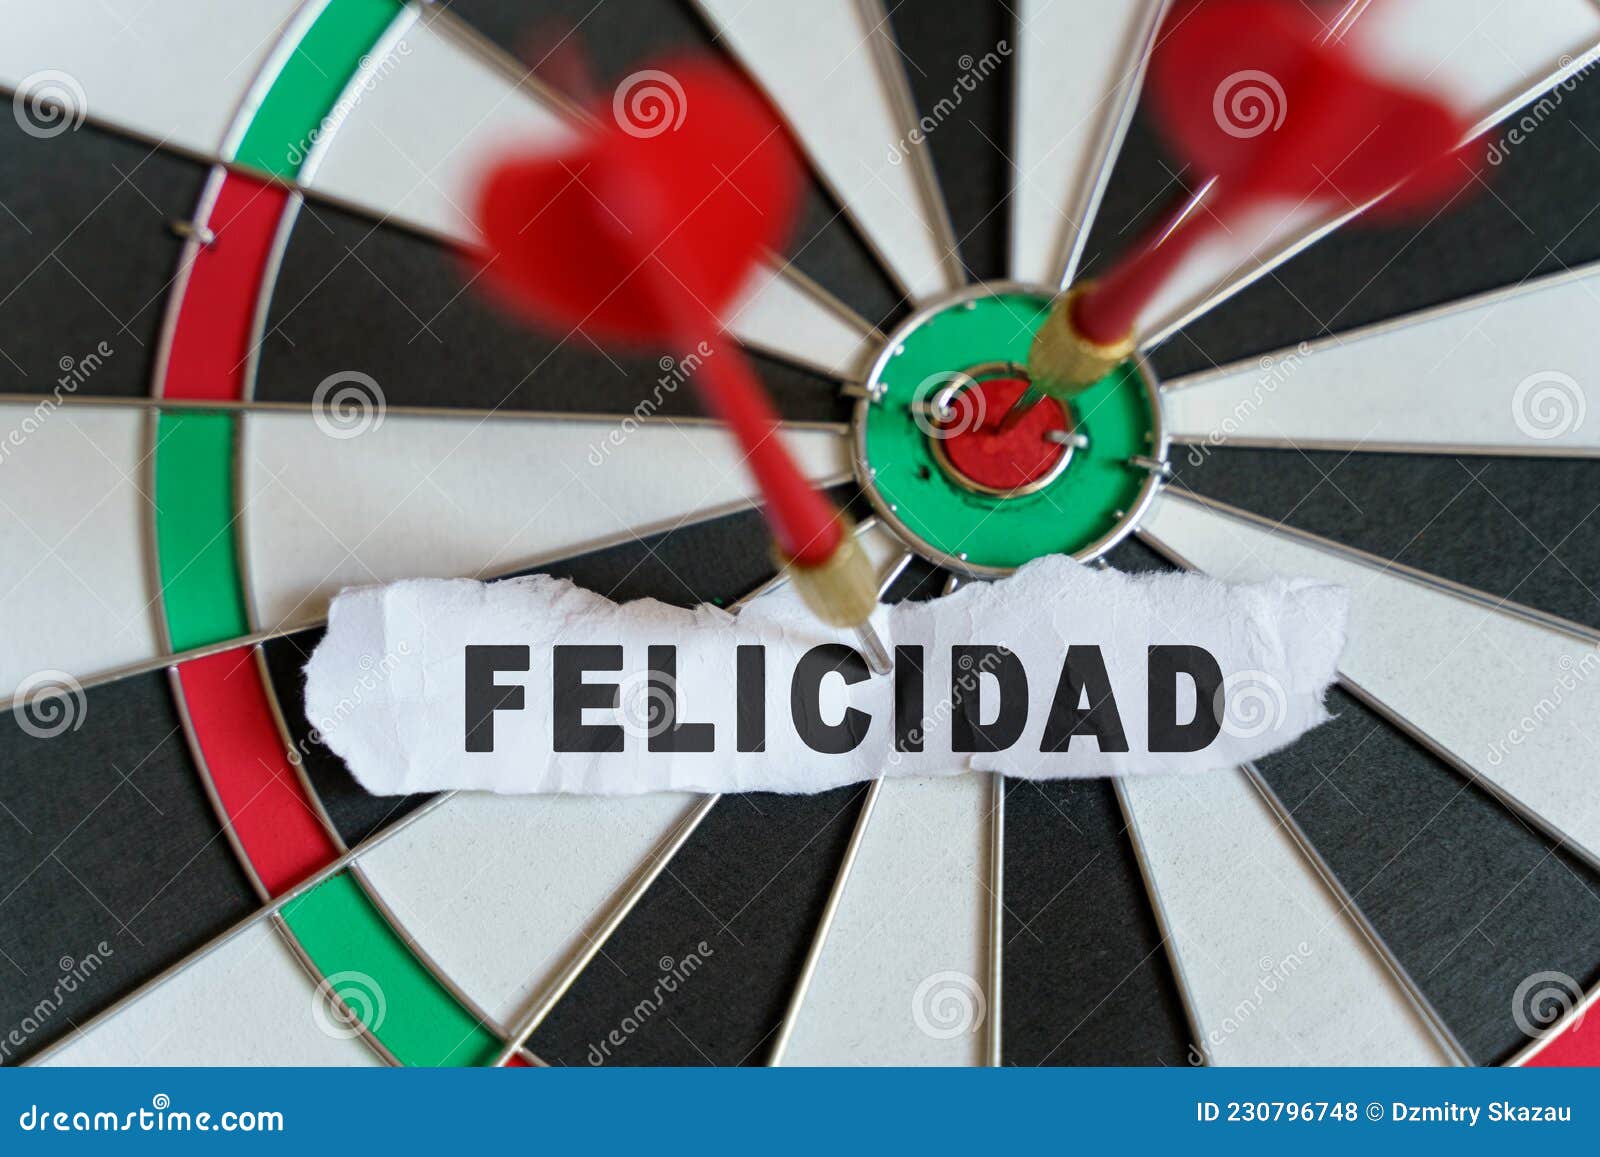 the picture shows a target, darts and a torn piece of paper with the inscription - felicidad